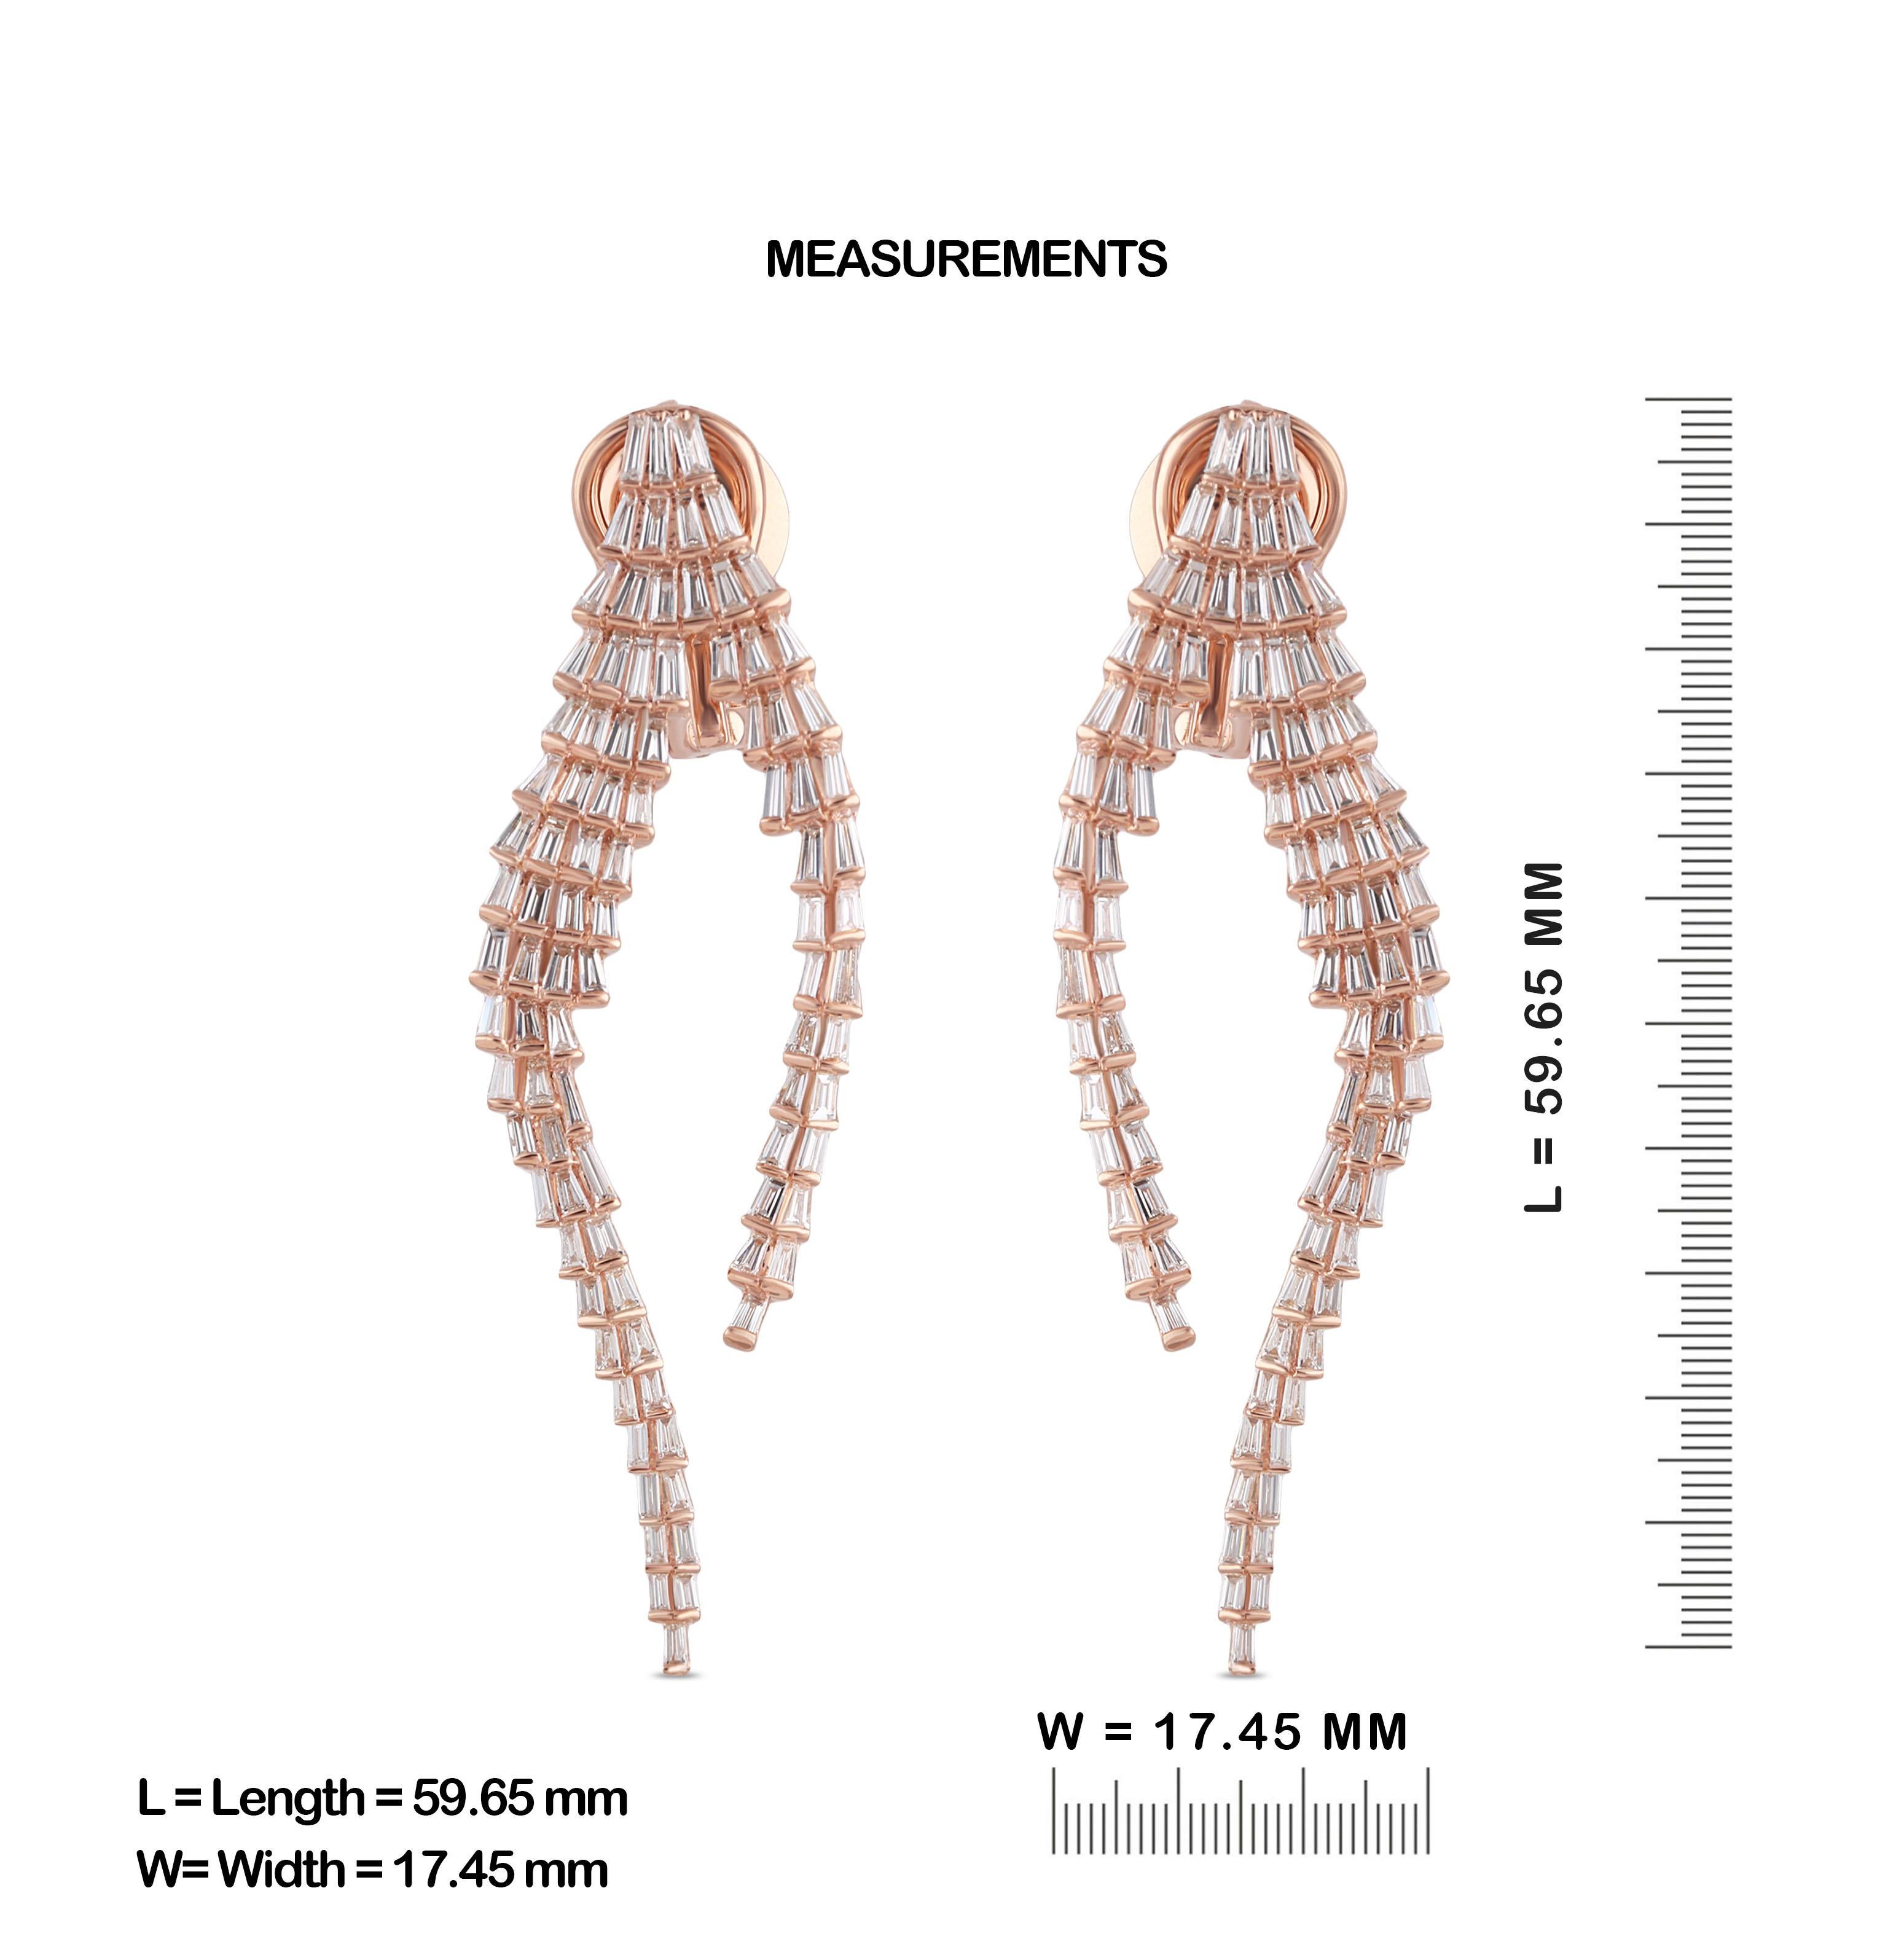 Gross Weight: 13.71 Grams
Diamond Weight: 3.61 cts
IGI Certification can be done on request.

Video of the product can be shared on request

Antique, unique and classic the combination of all, here we have these earrings in 18 karat rose gold,